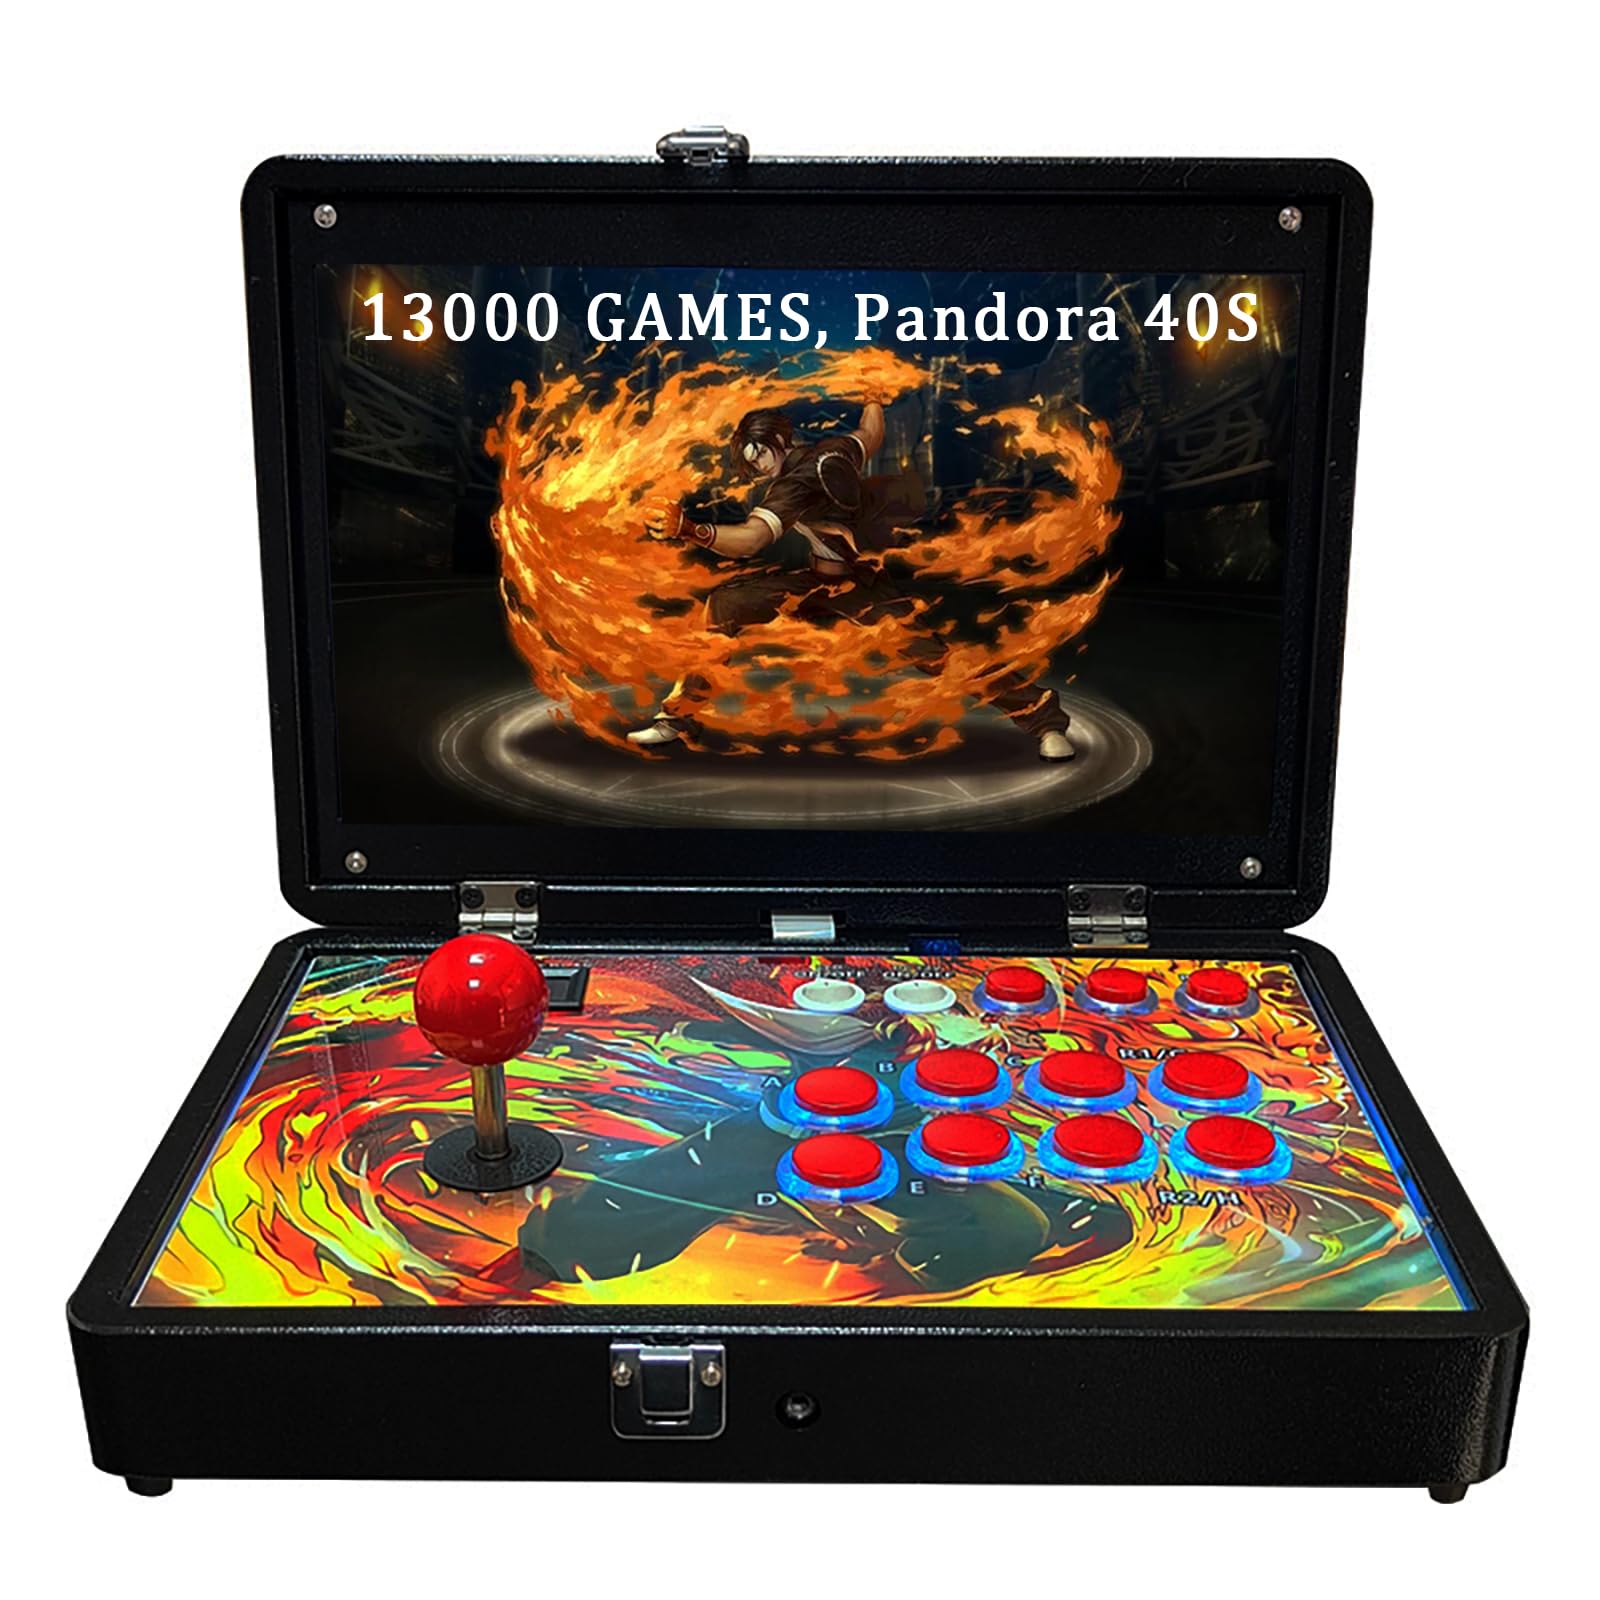 RegiisJoy Portable 13000 in 1 Pandoras Box 30S 3D Arcade Game Console, 14-inch Screen Retro Video Game Machine with Search/Hide/Save/Load/Pause Function